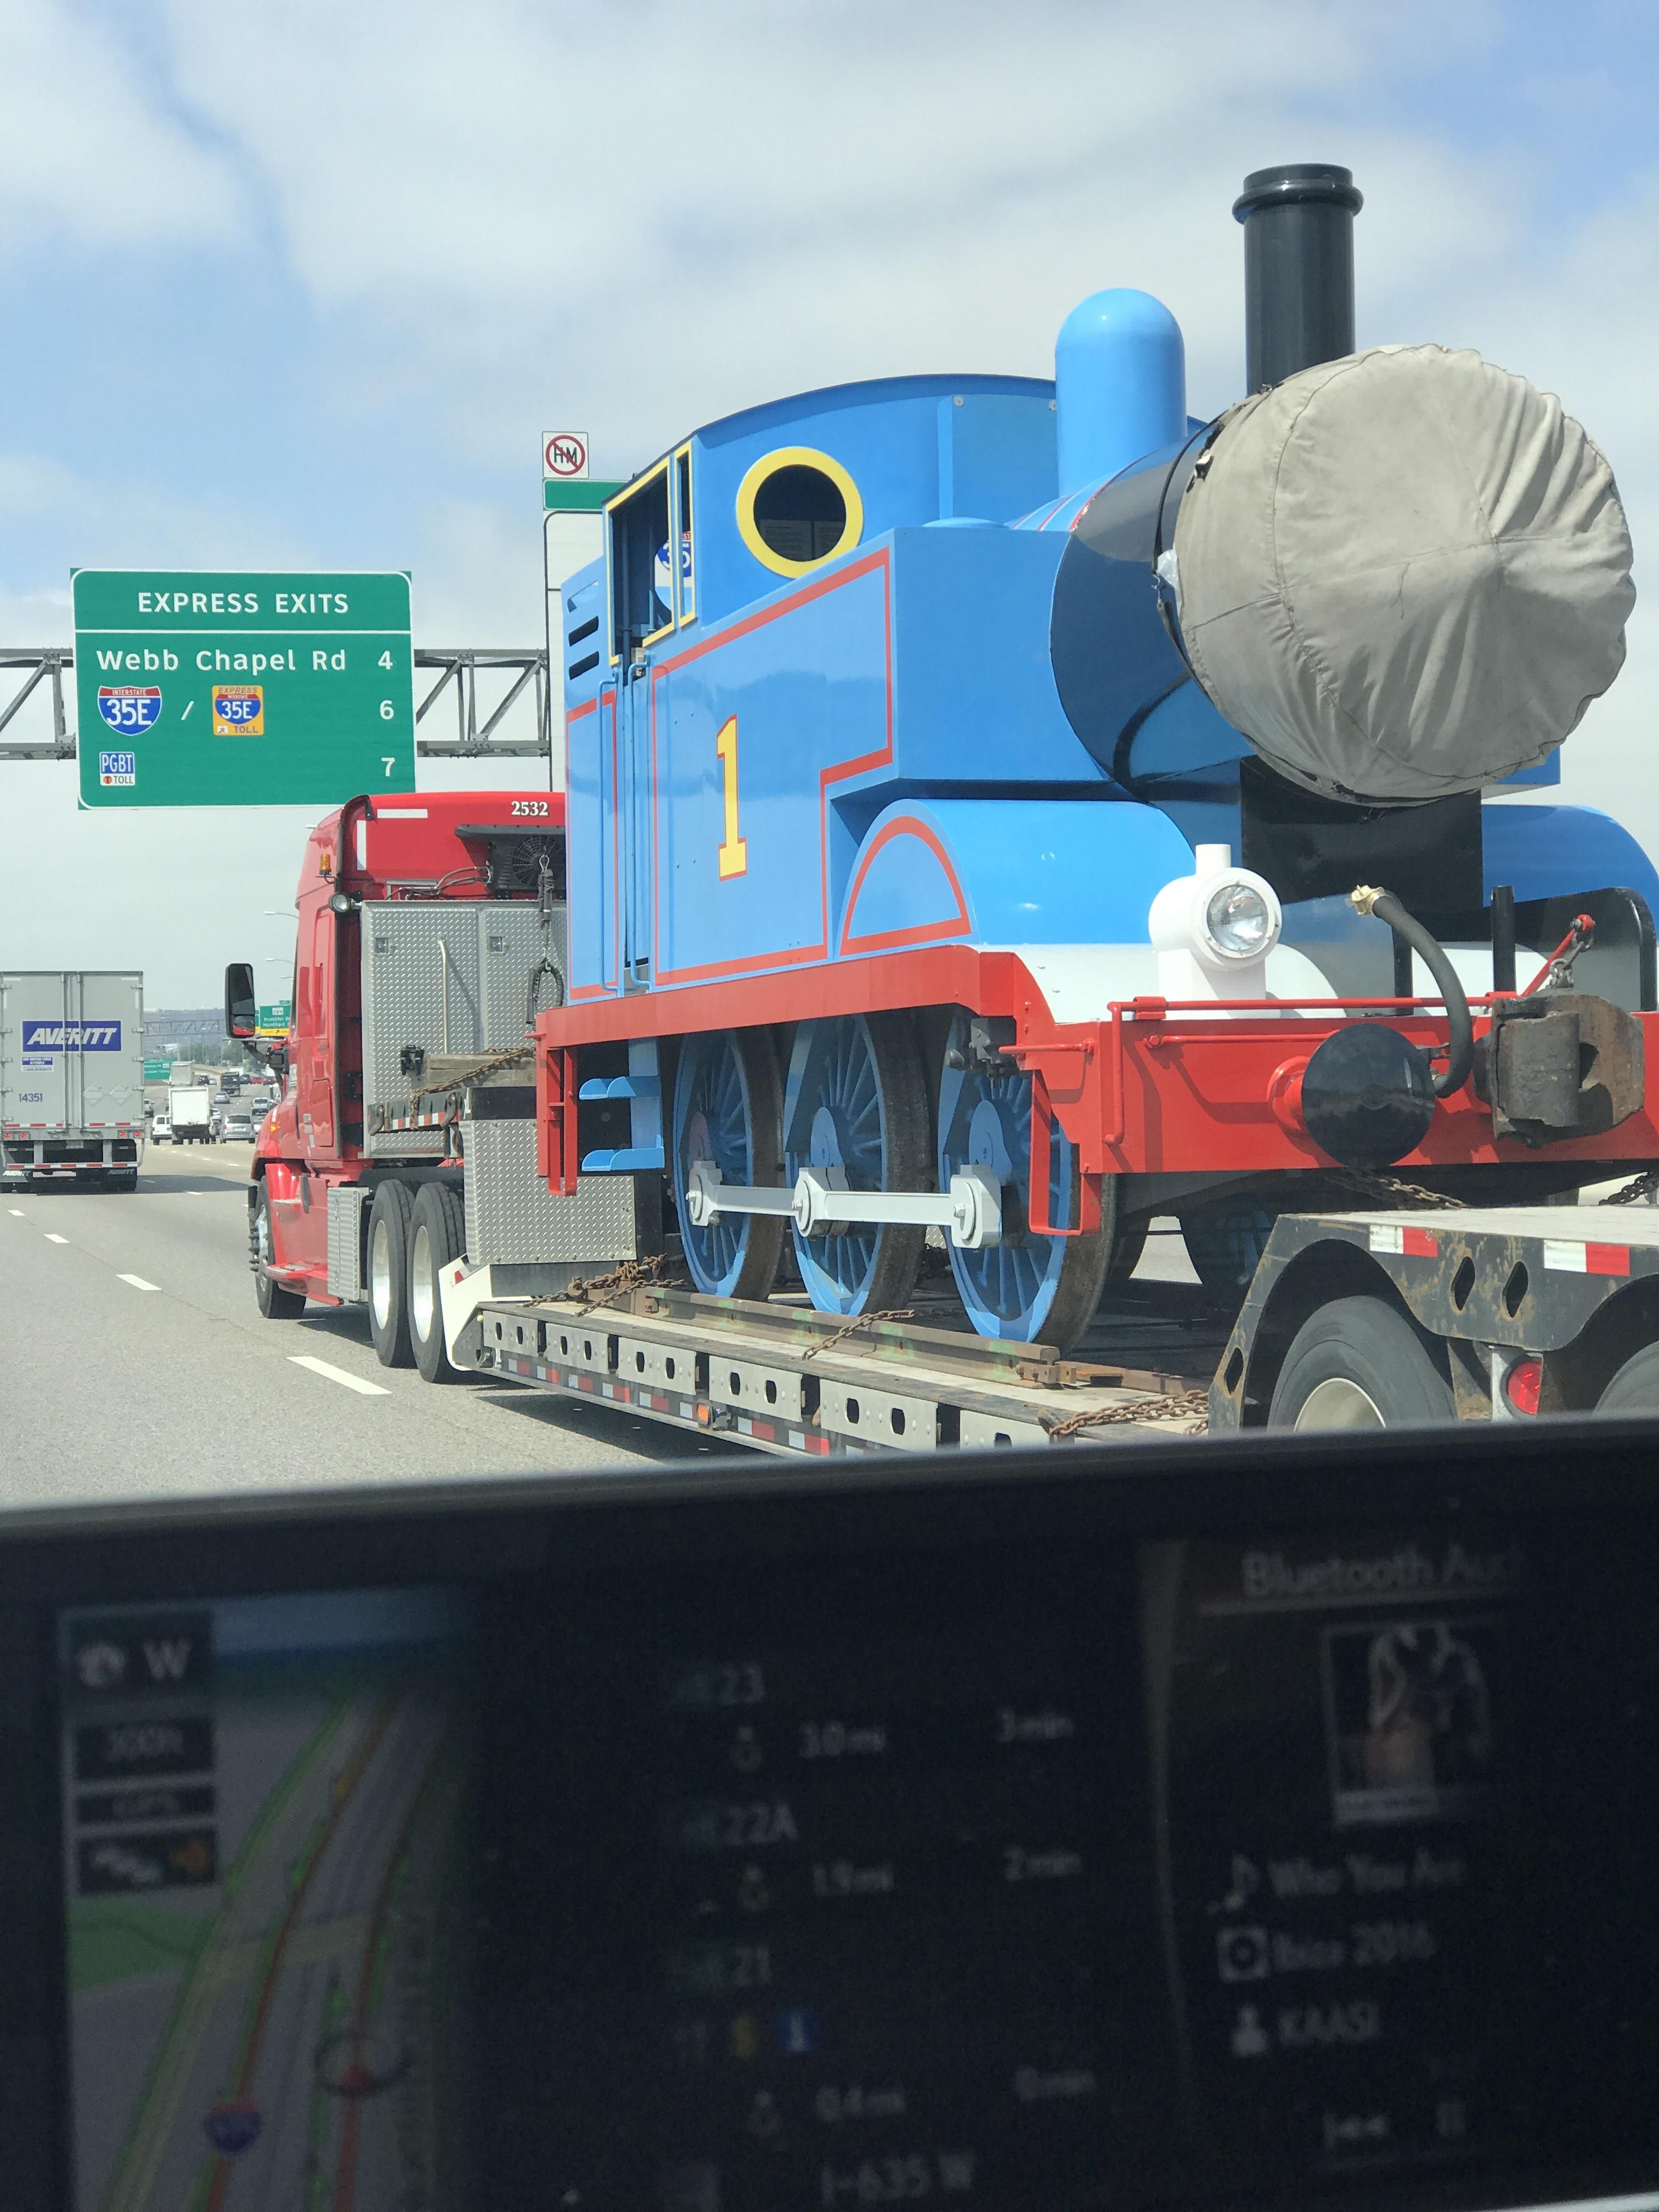 They kidnapped Thomas!